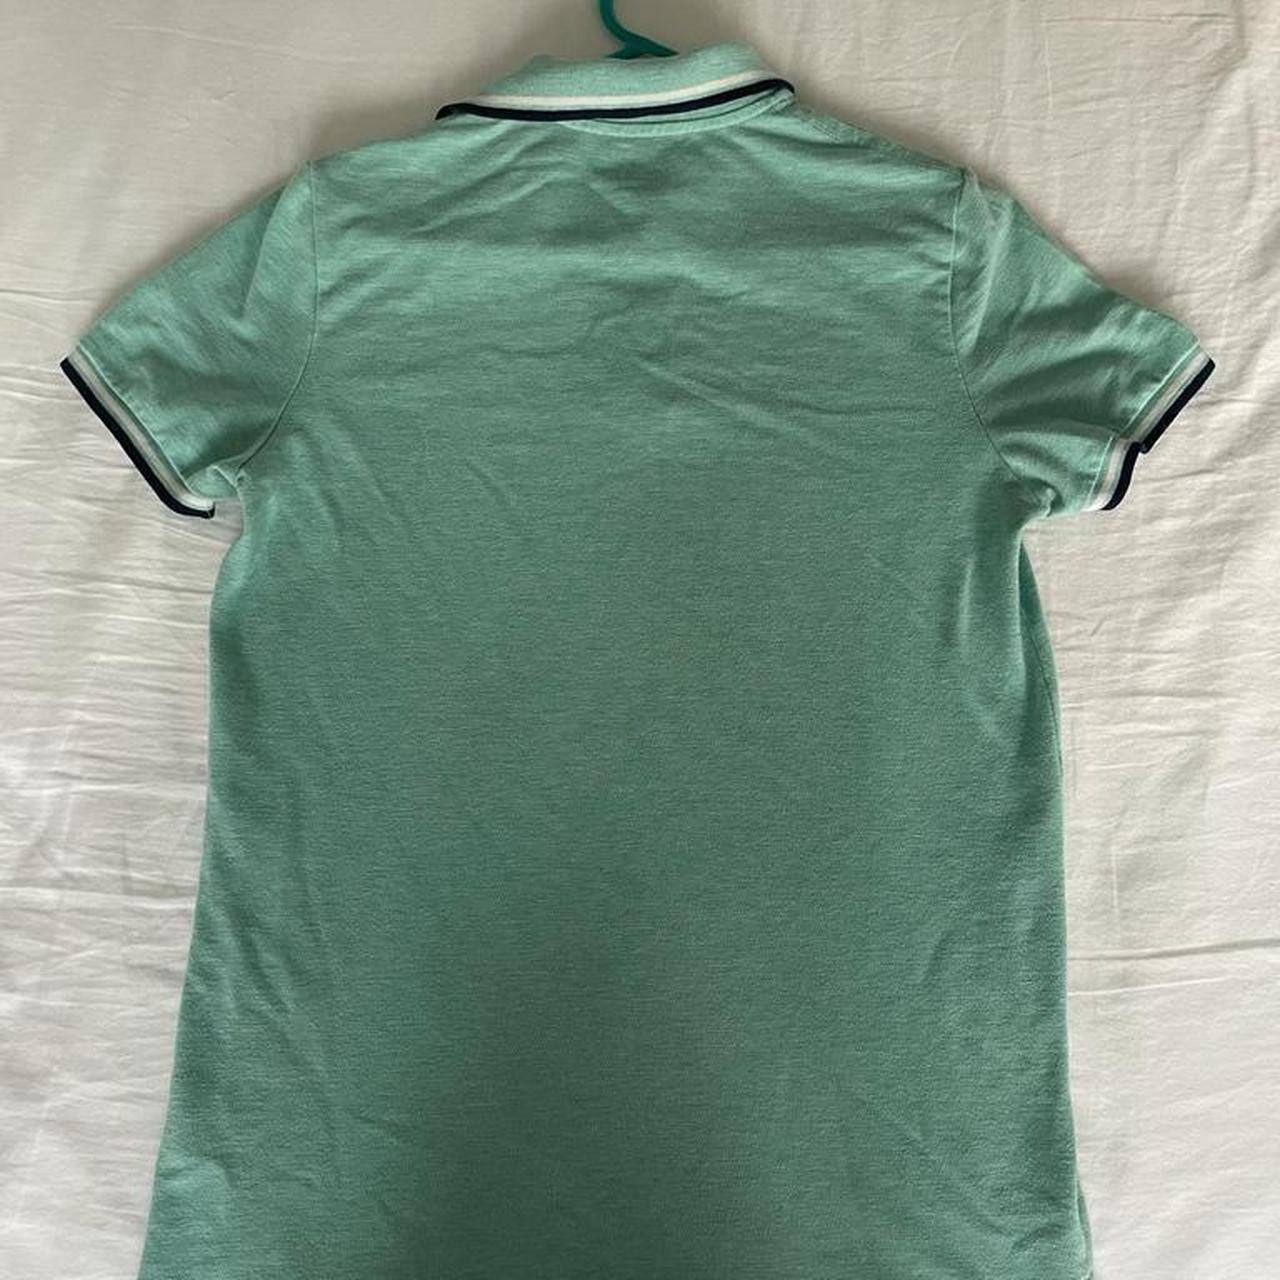 American Eagle Outfitters Men's Polo-shirts | Depop